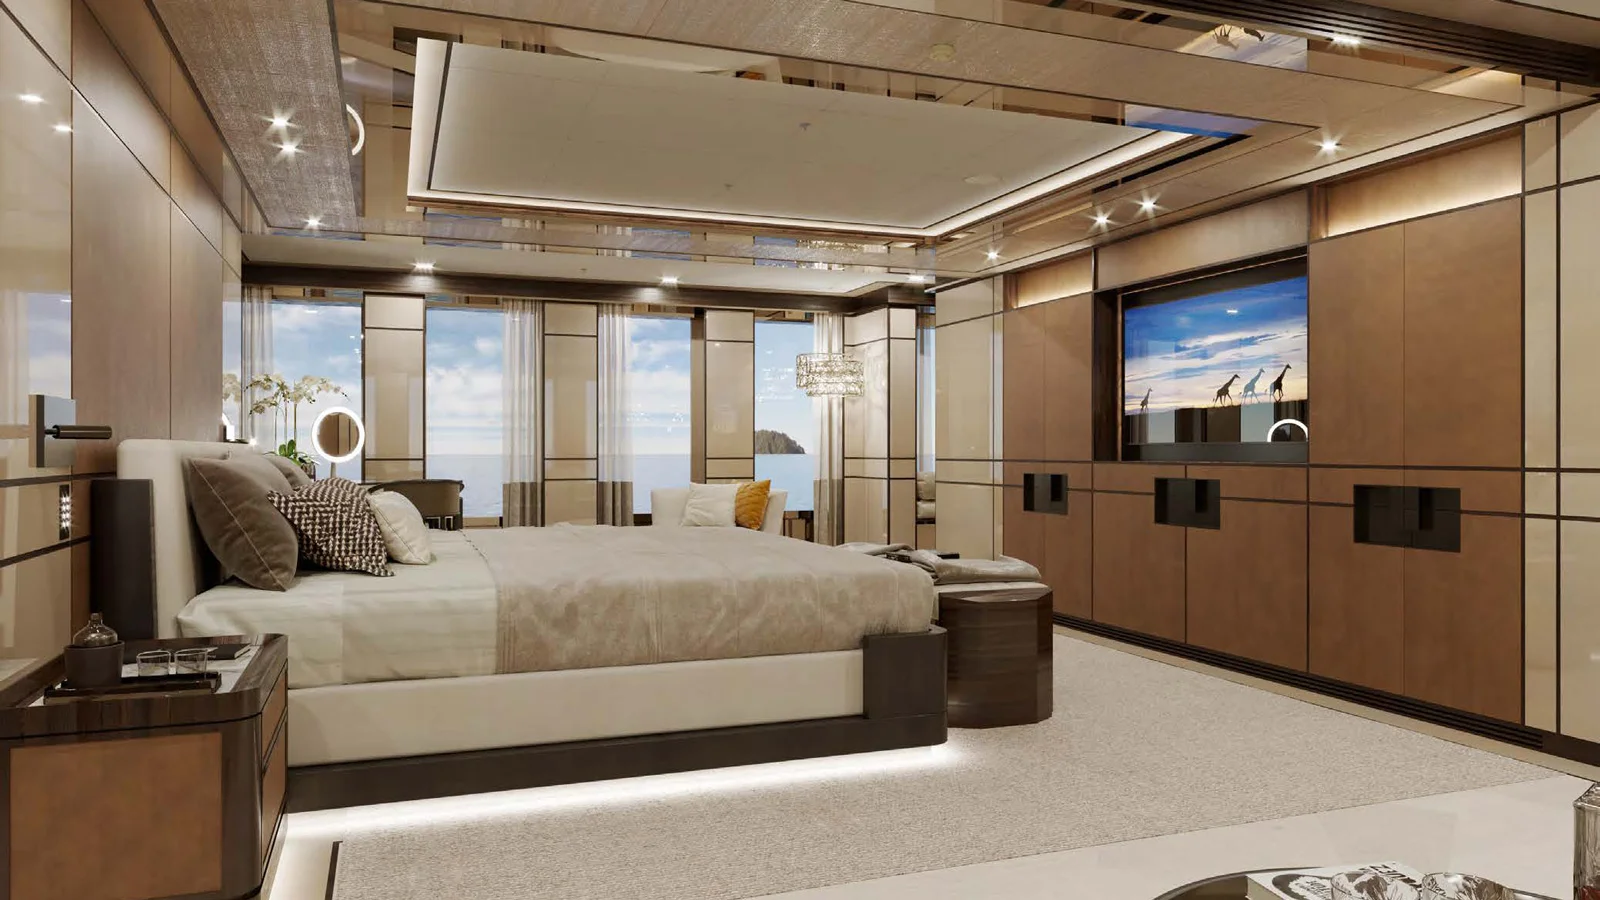 Full-beam owner’s stateroom on the main deck